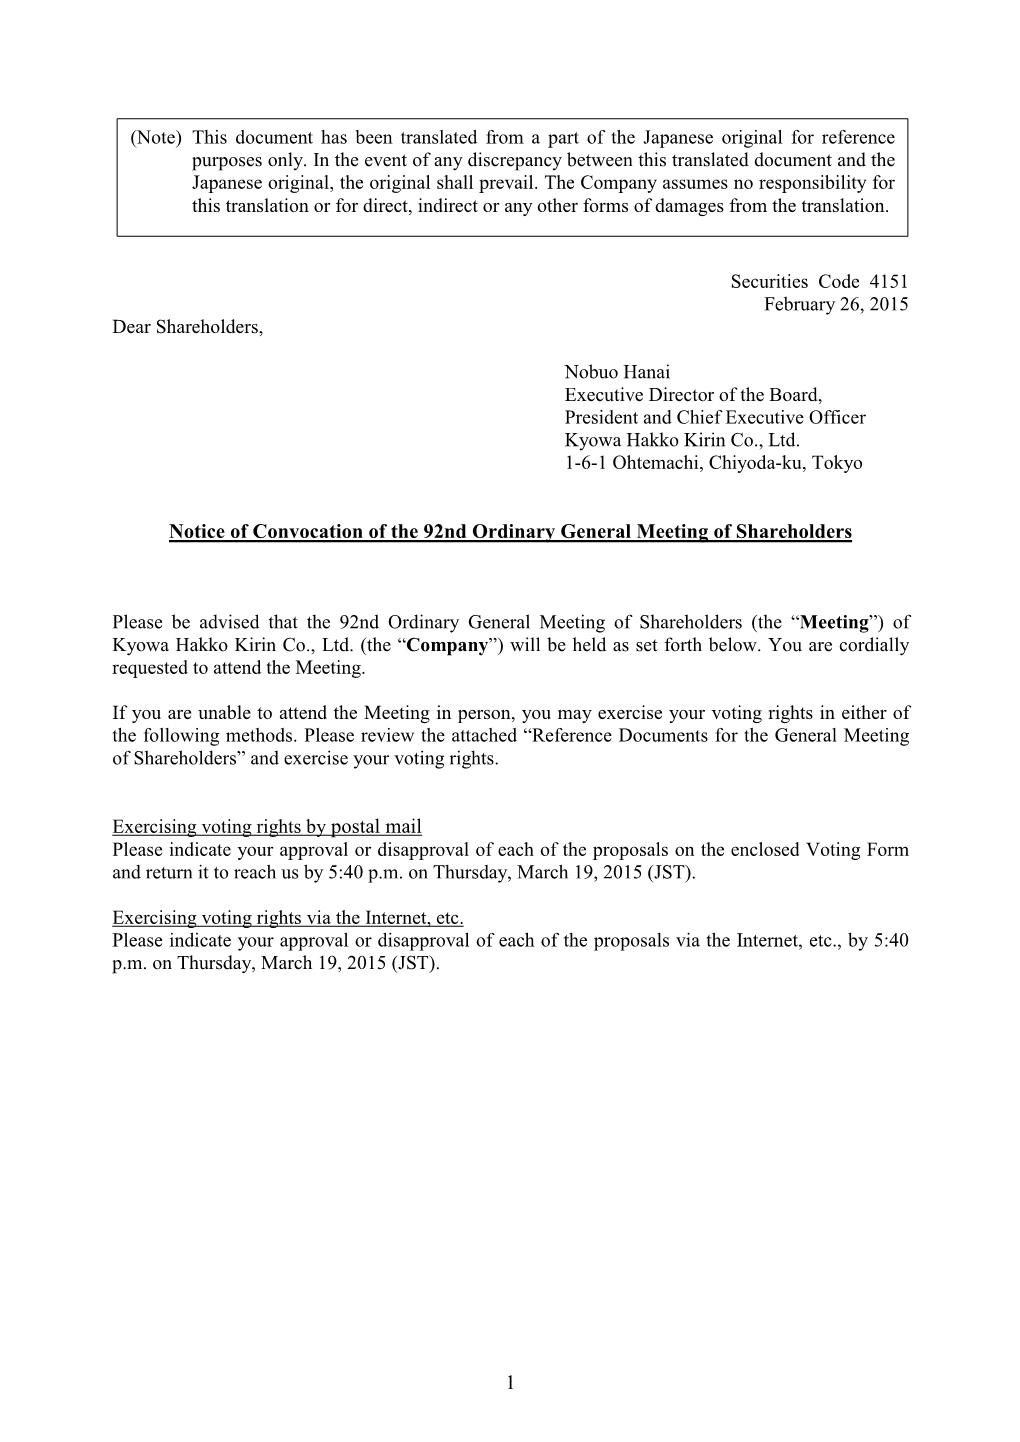 Notice of Convocation of the 92Nd Ordinary General Meeting of Shareholders